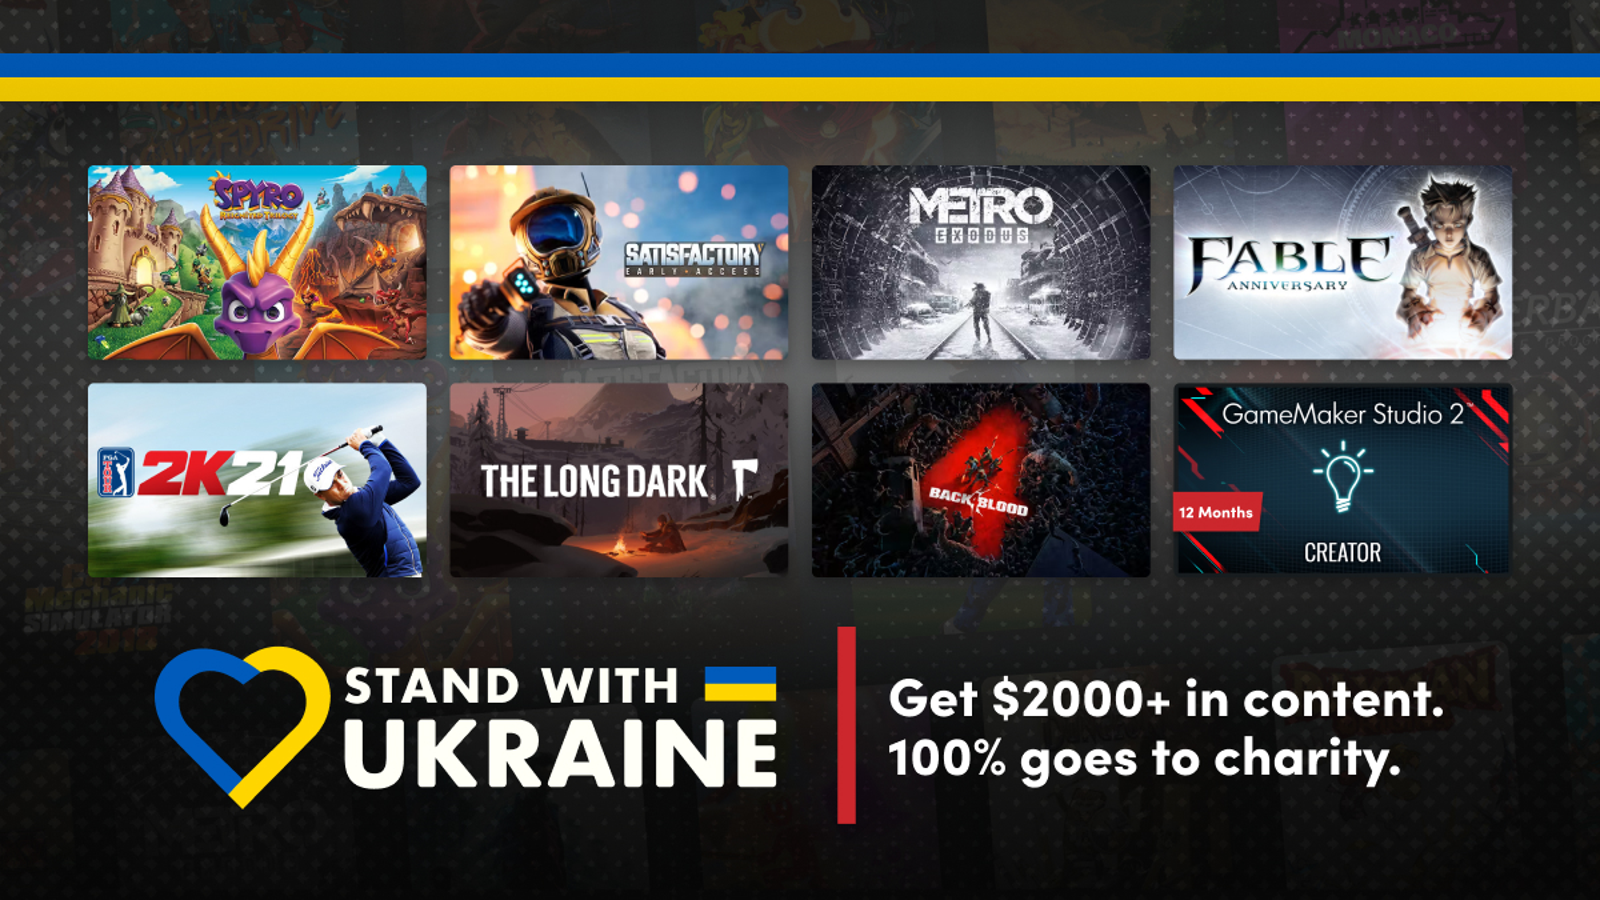 Humble Bundle 'Stand with Ukraine' offer launches, will support  humanitarian relief